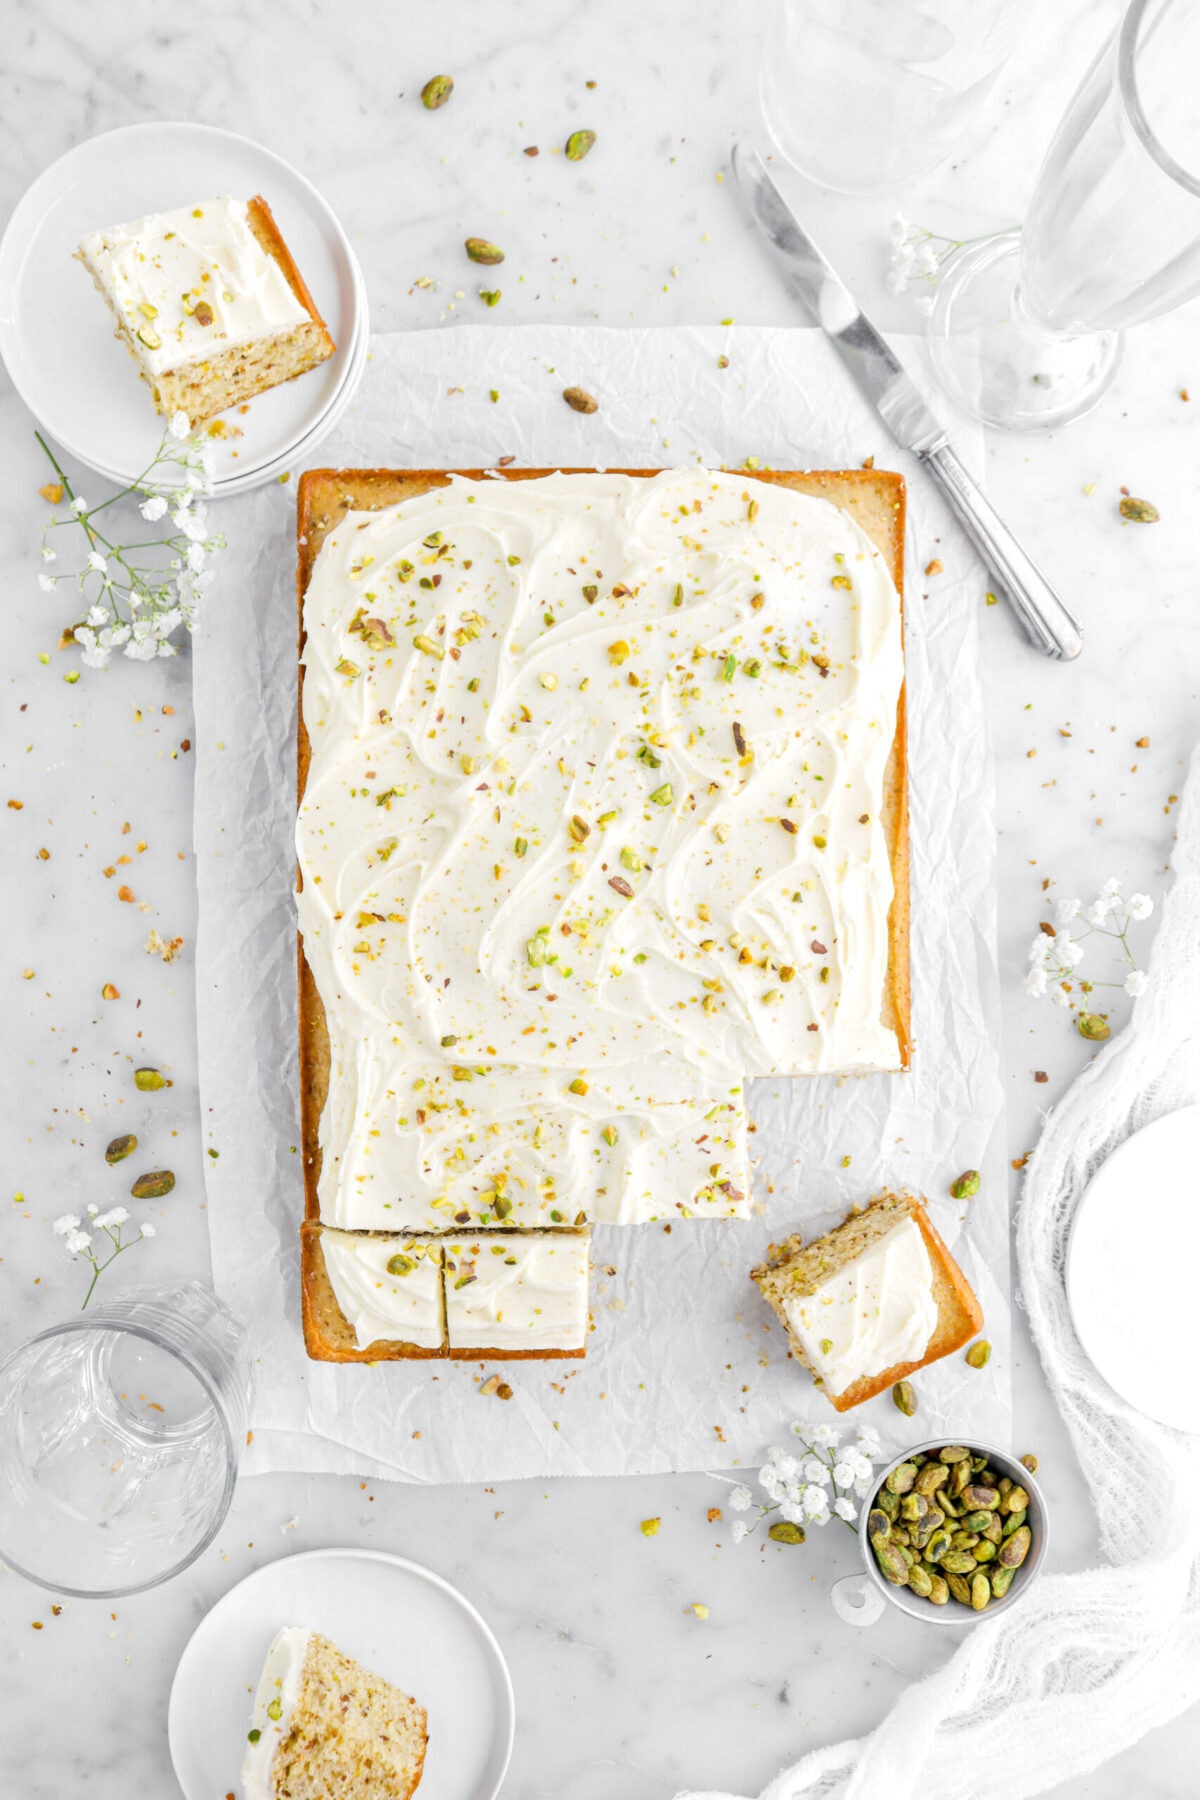 overhead shot of pistachio cake with slices cut into it with two slices on plates around cake with pistachios and white flowers around.